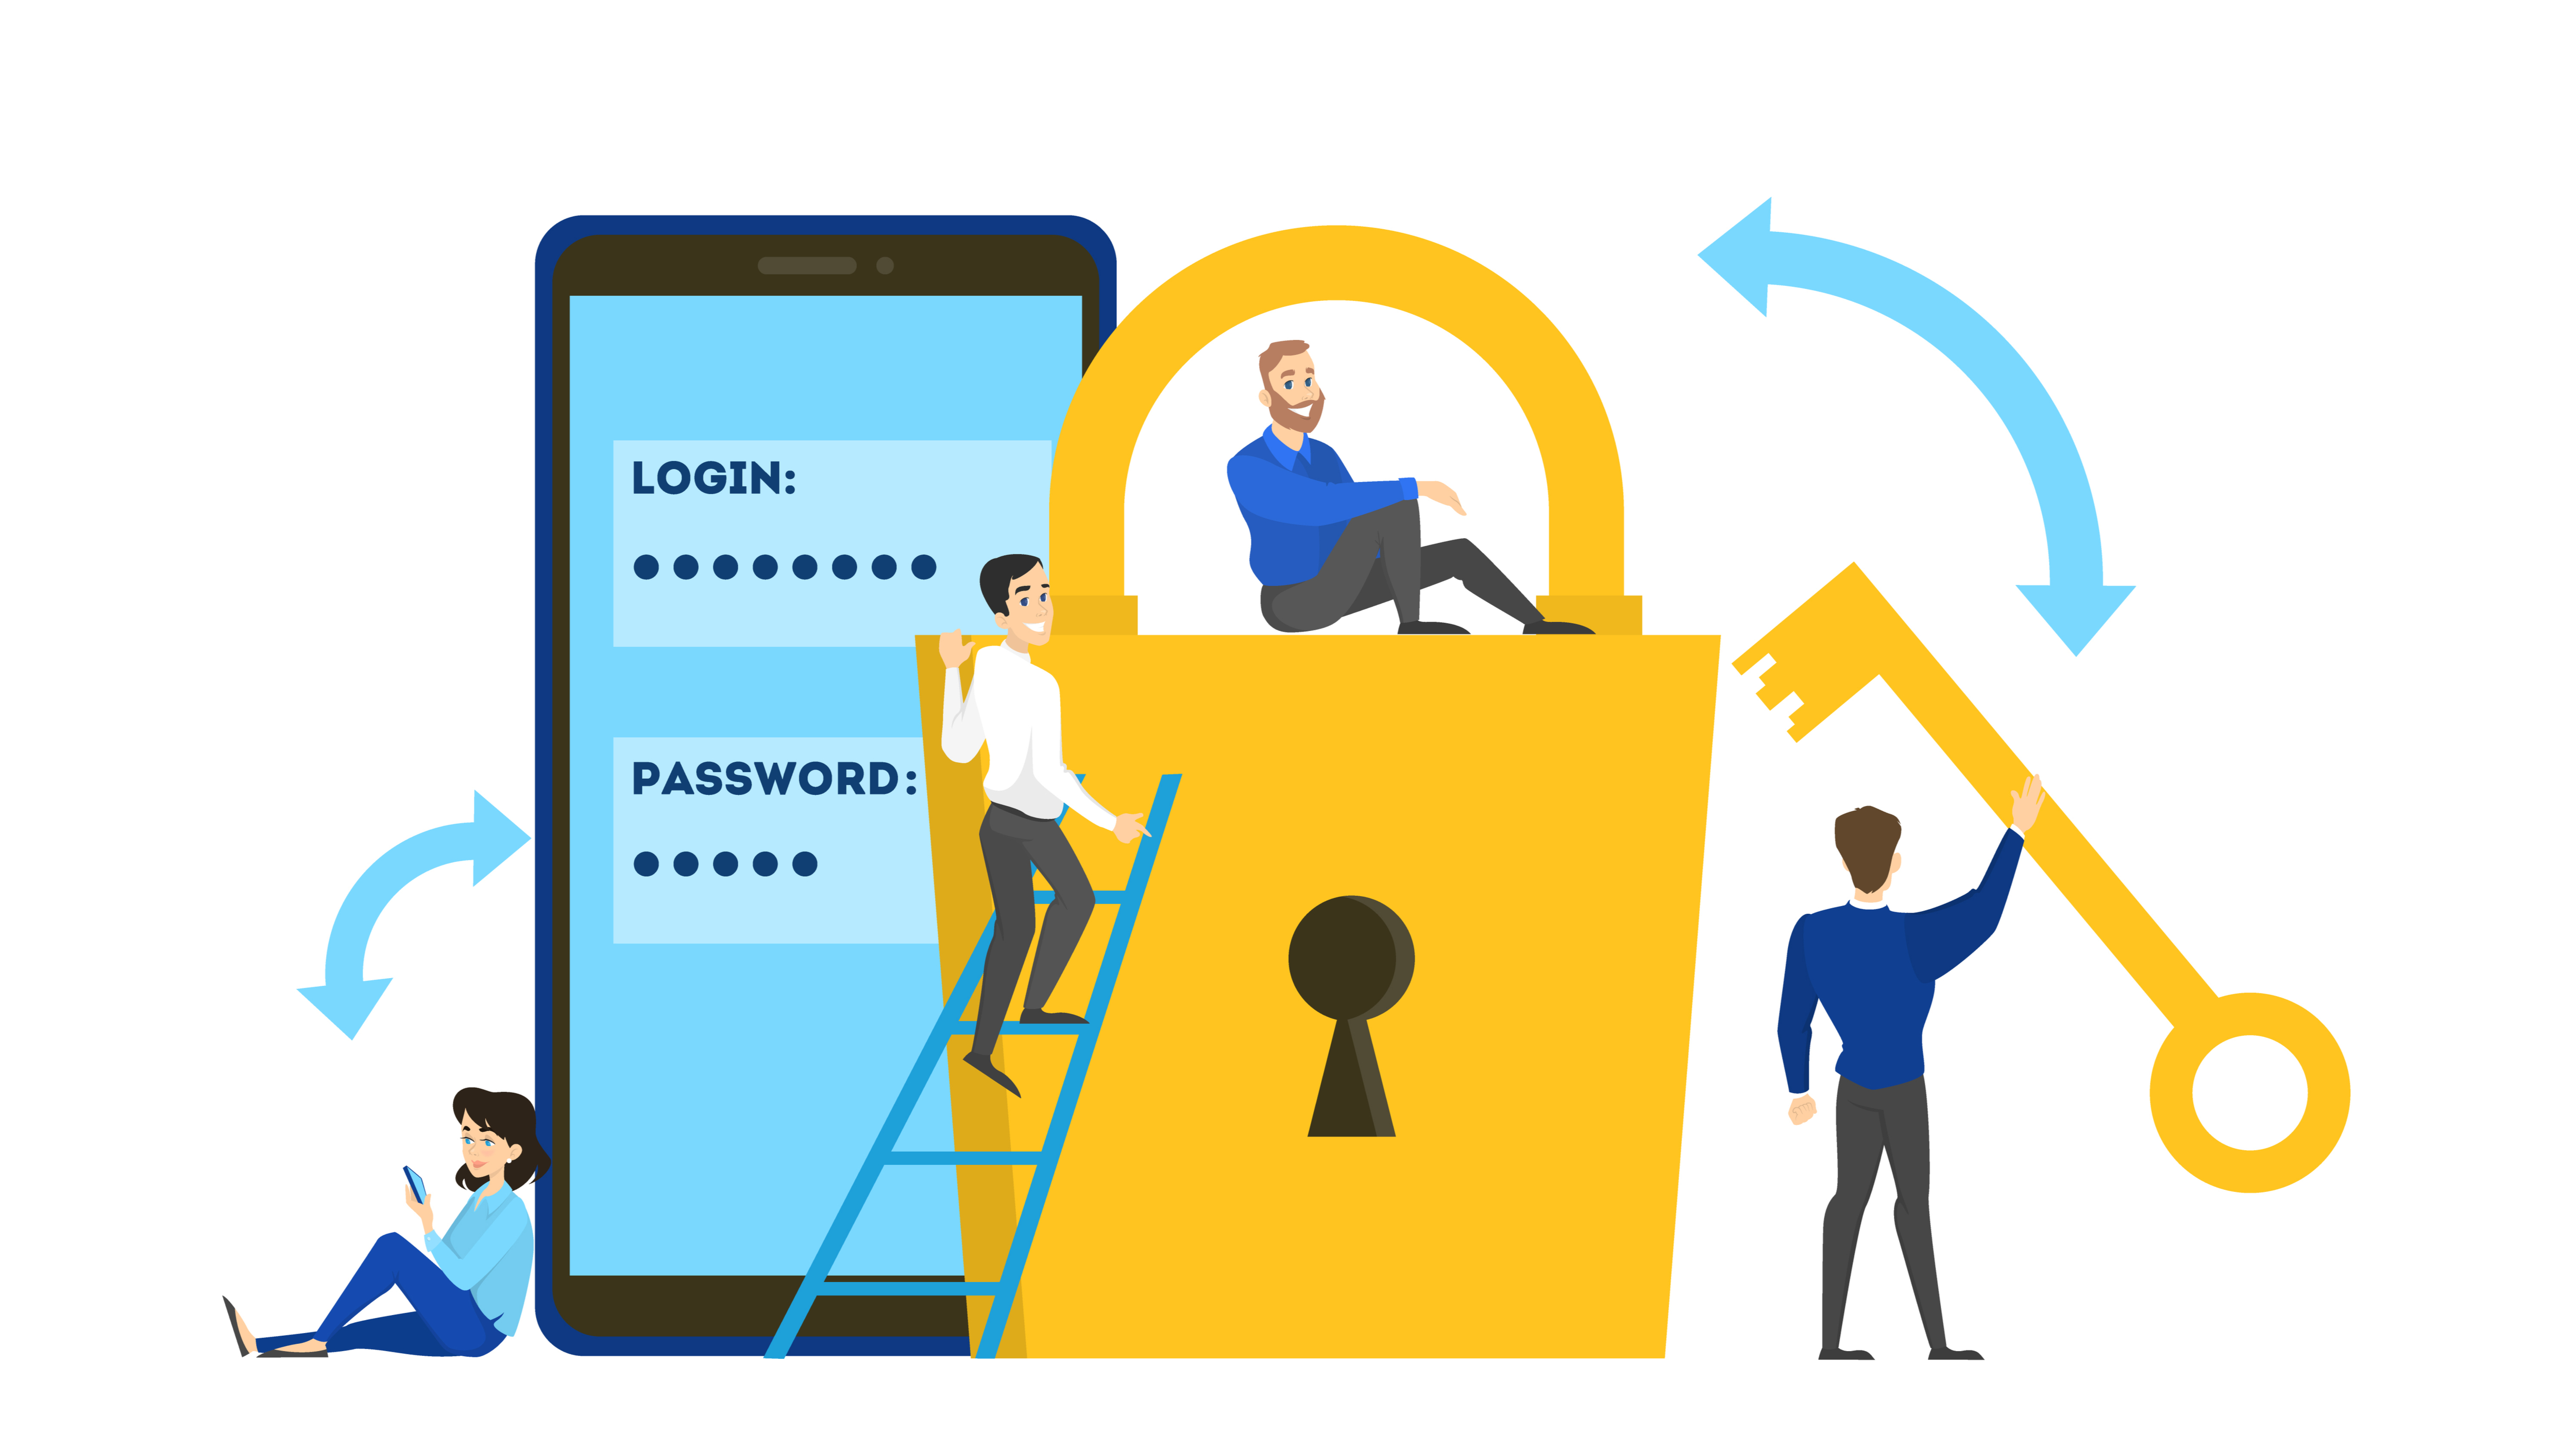 Vector image of various individuals ensuring someone's password security on the phone